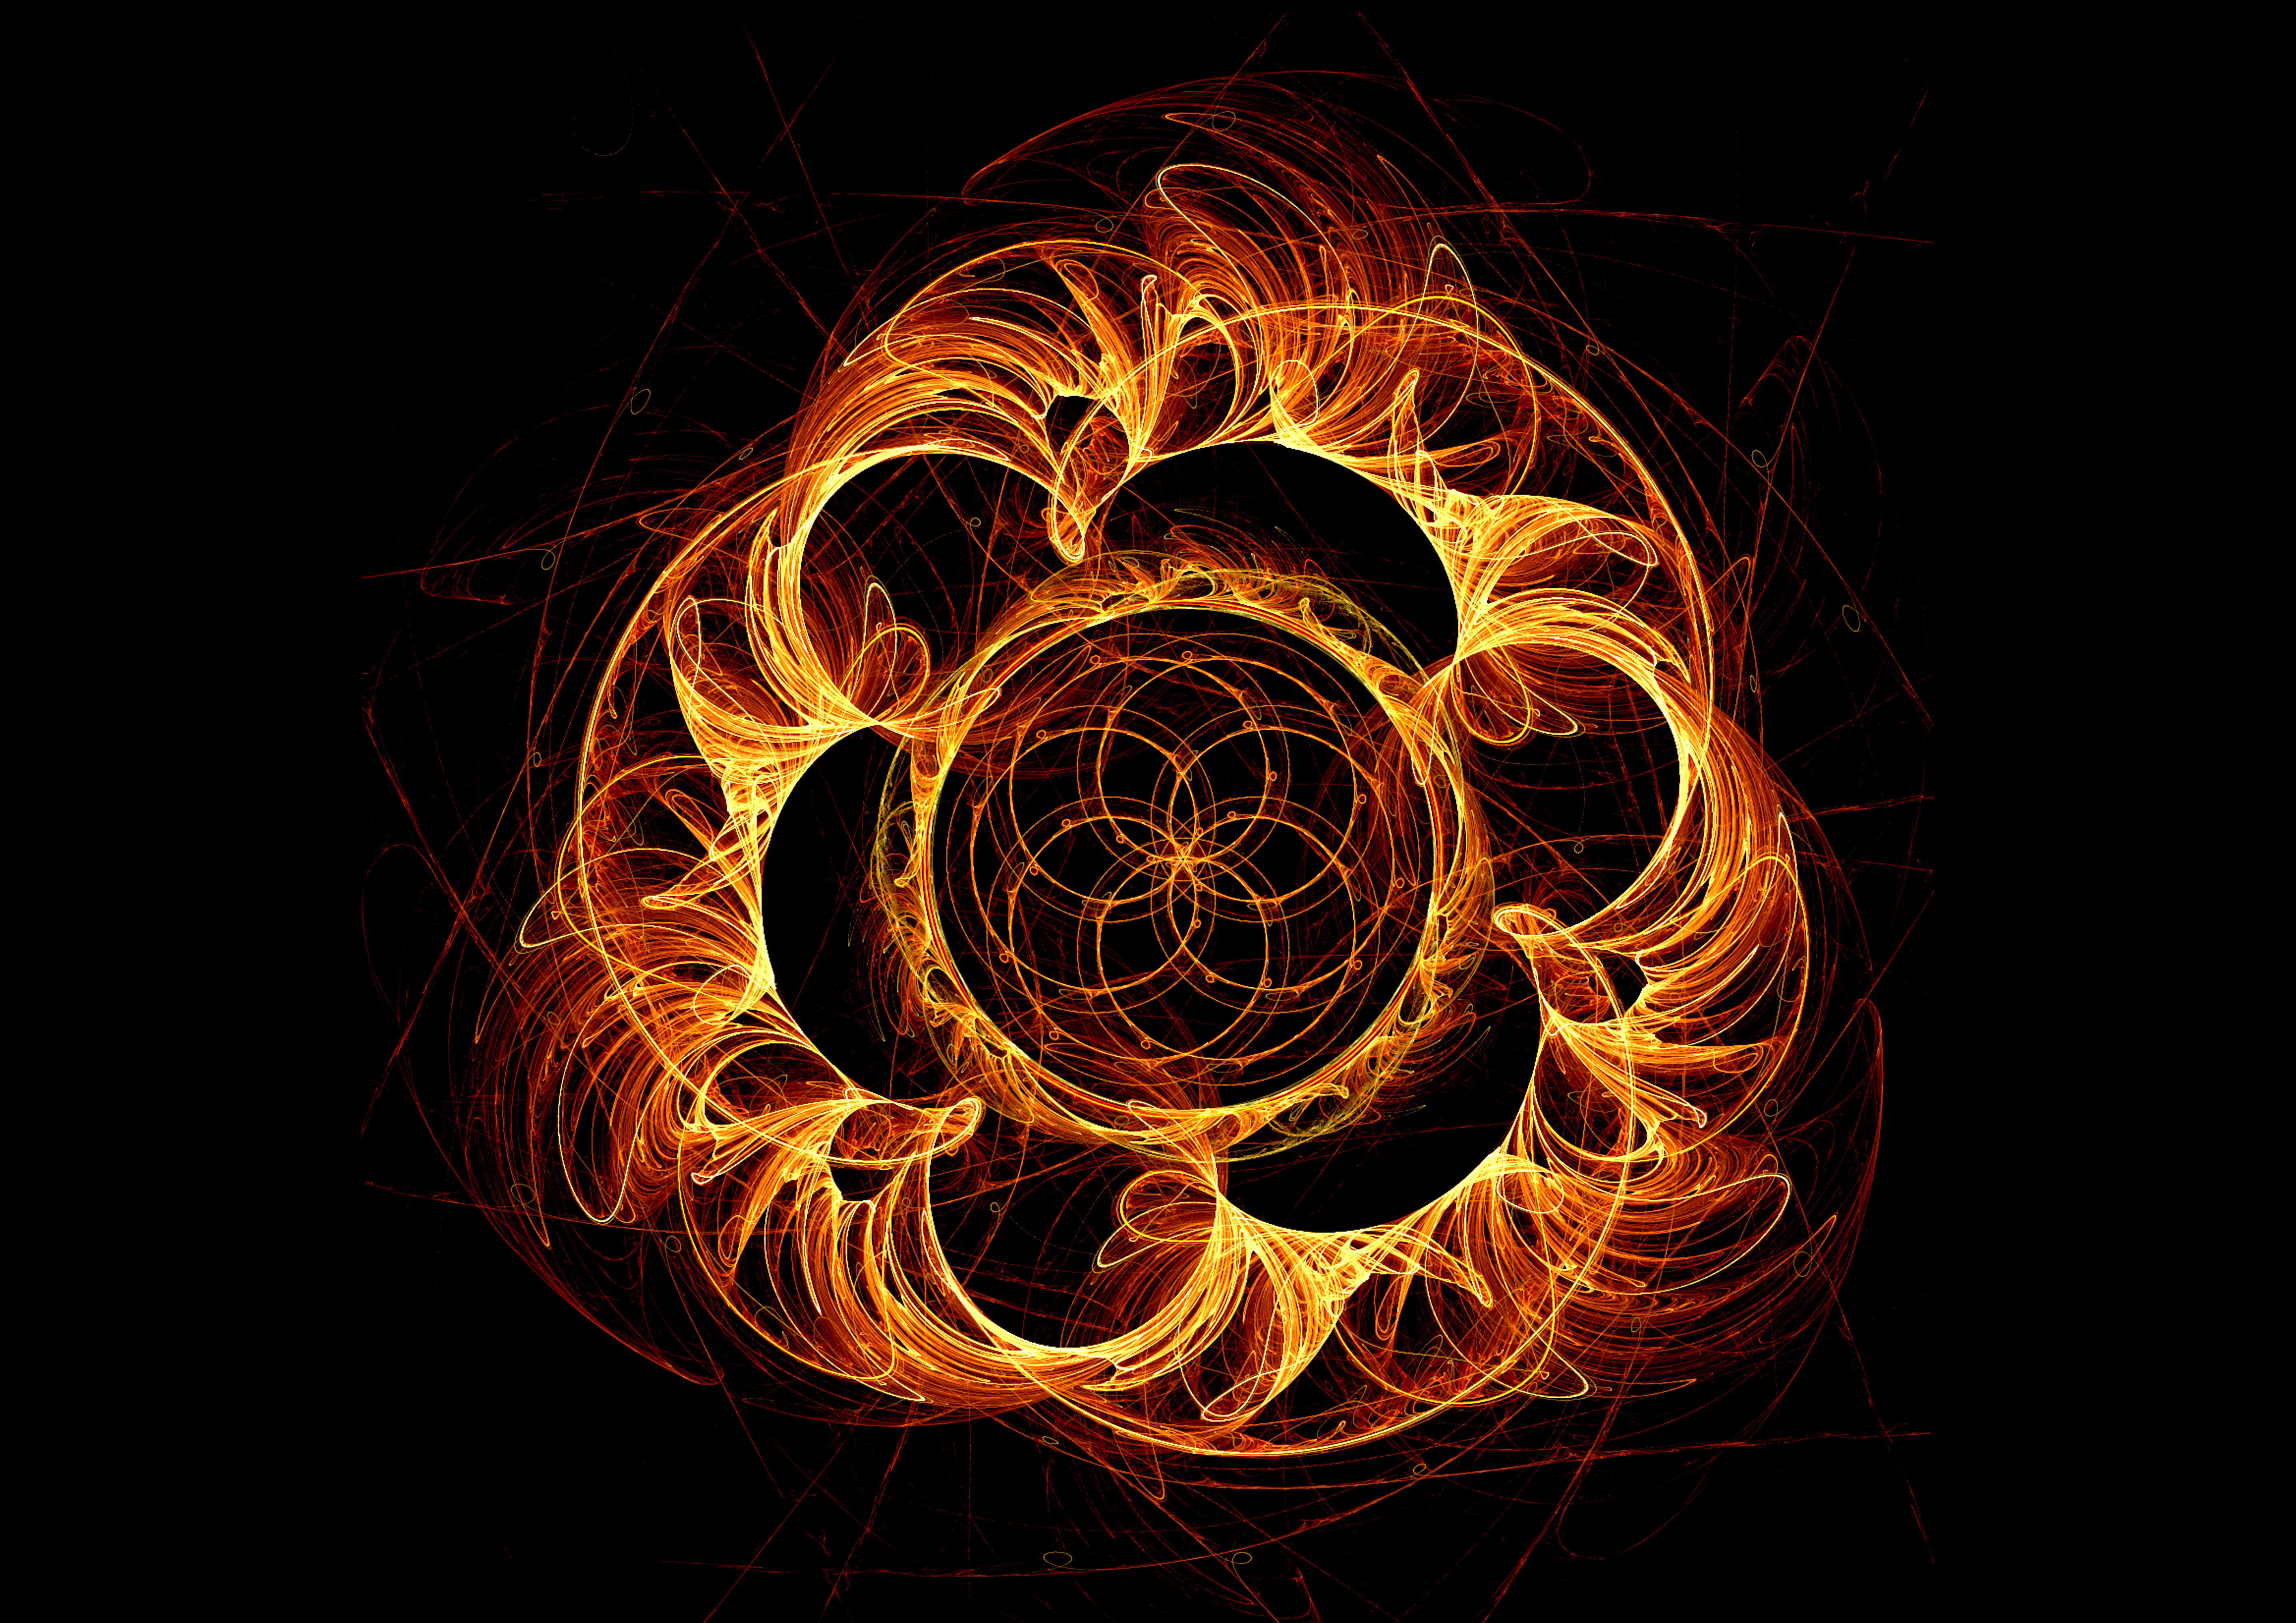 Download PC Wallpaper abstract, bright, fractal, confused, intricate, flaming, swirling, involute, fiery